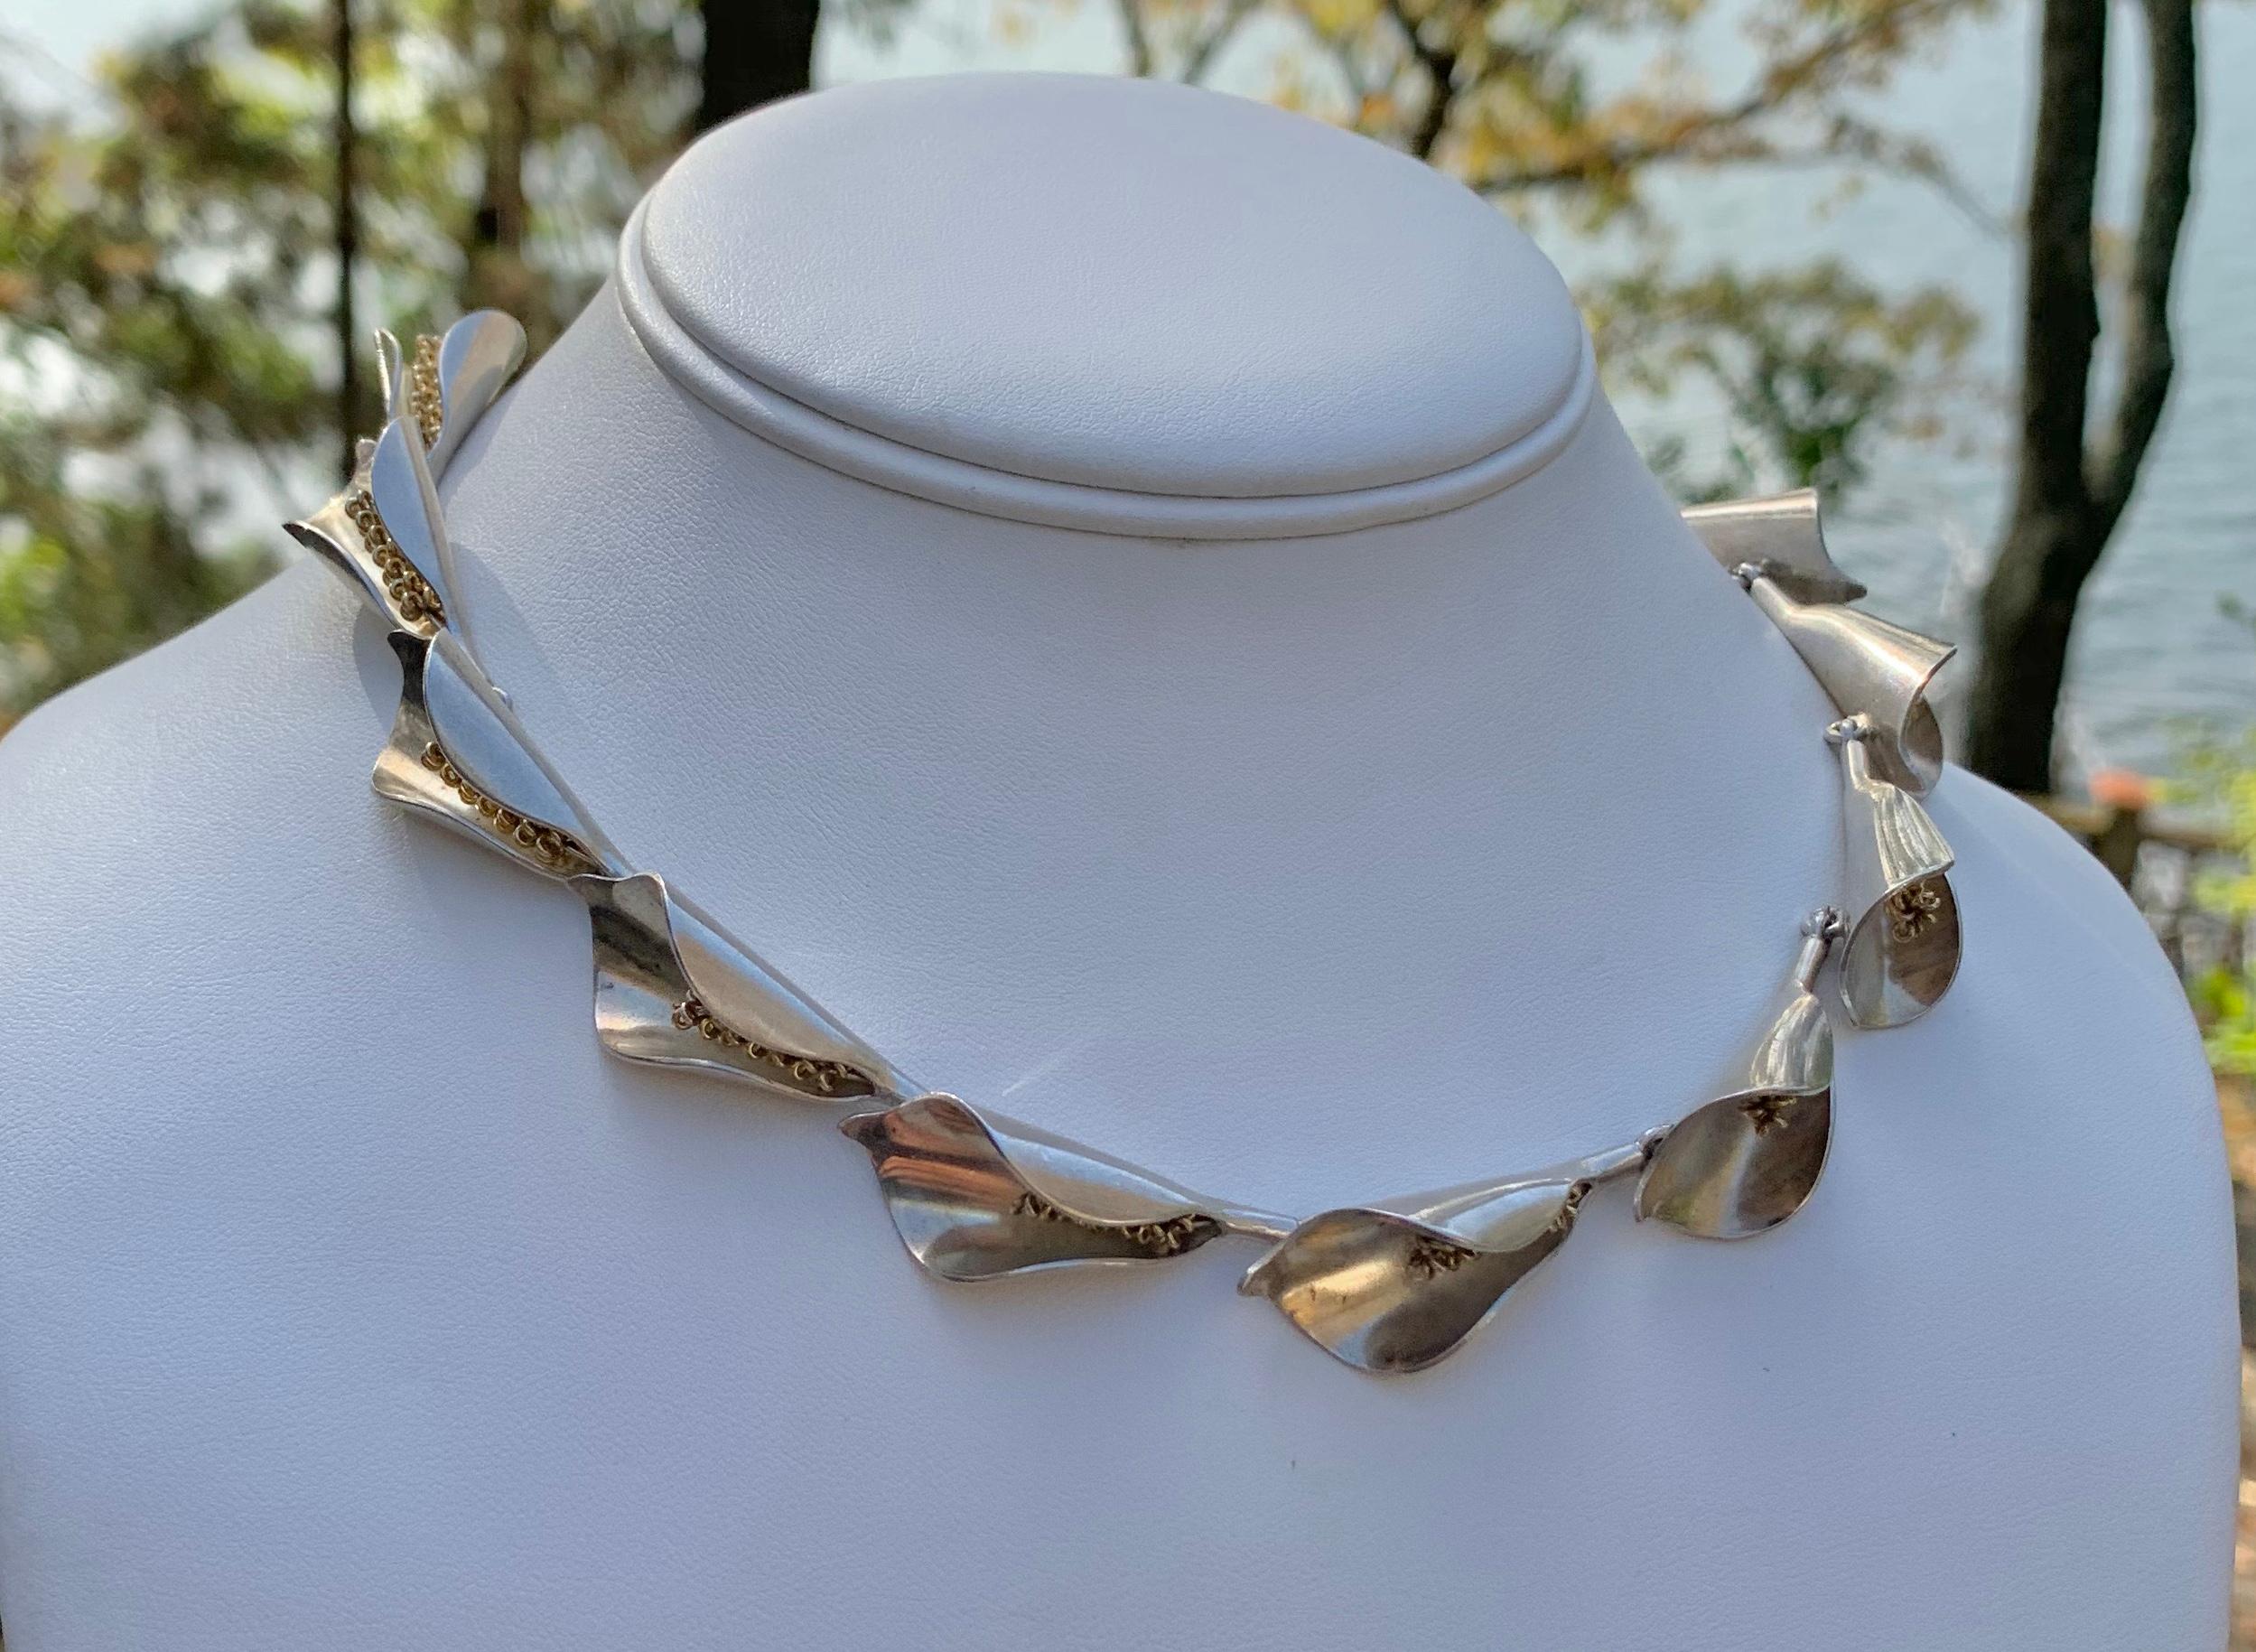 Anton Michelsen Calla Lily Necklace by Gertrude Engel Rougie Sterling, Denmark In Good Condition For Sale In New York, NY